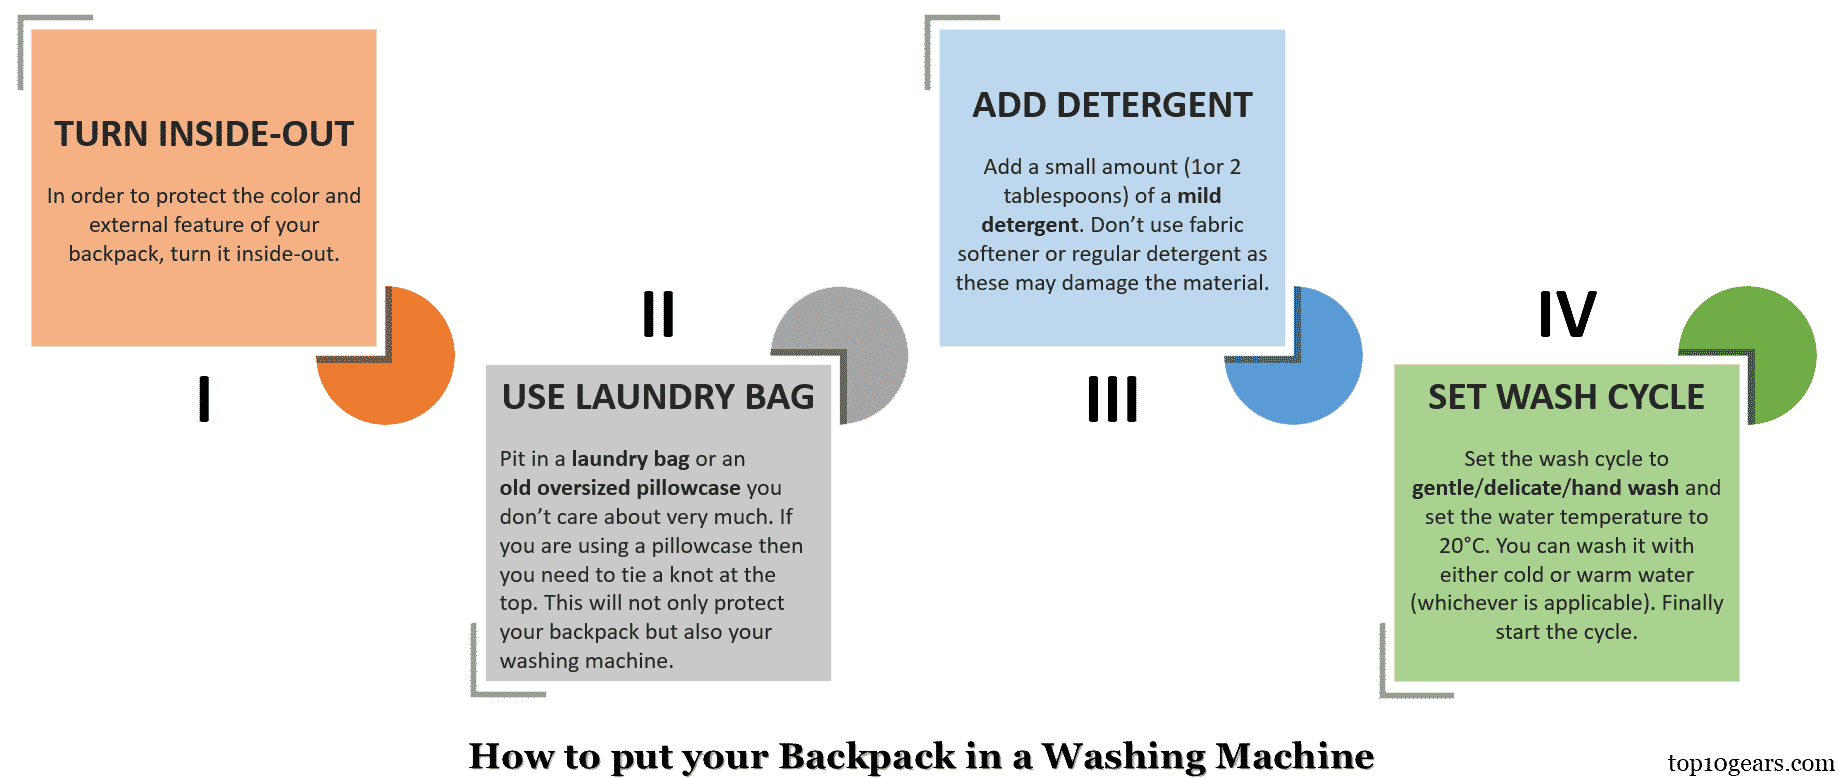 How to put your backpack in washing machine